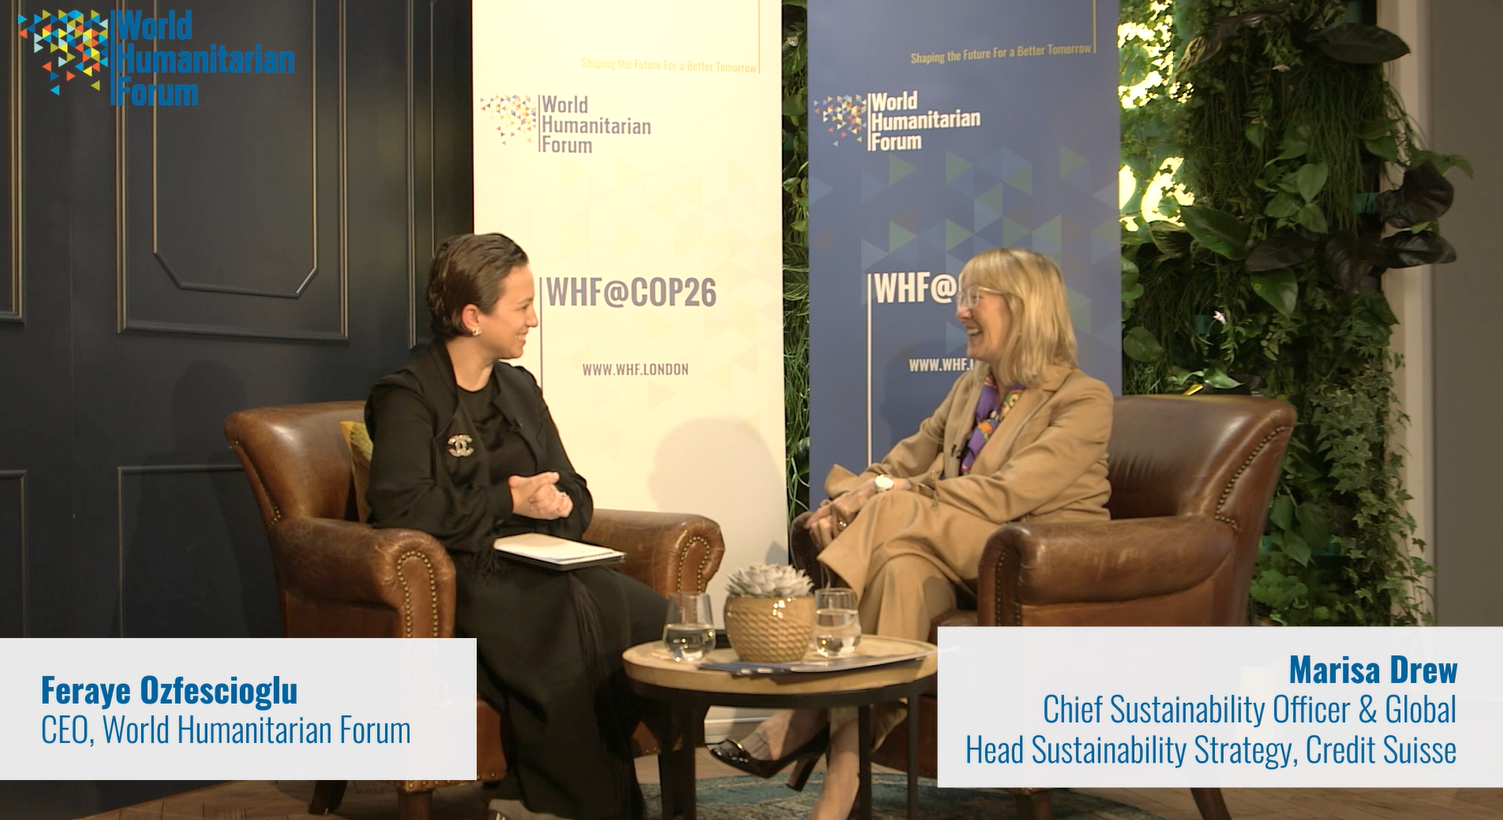 WHFTalks.Live COP26 Special Edition | Feraye Ozfescioglu, CEO, World Humanitarian Forum in conversation with Marisa Drew, Chief Sustainability Officer & Global Head Sustainability Strategy, Credit Suisse 